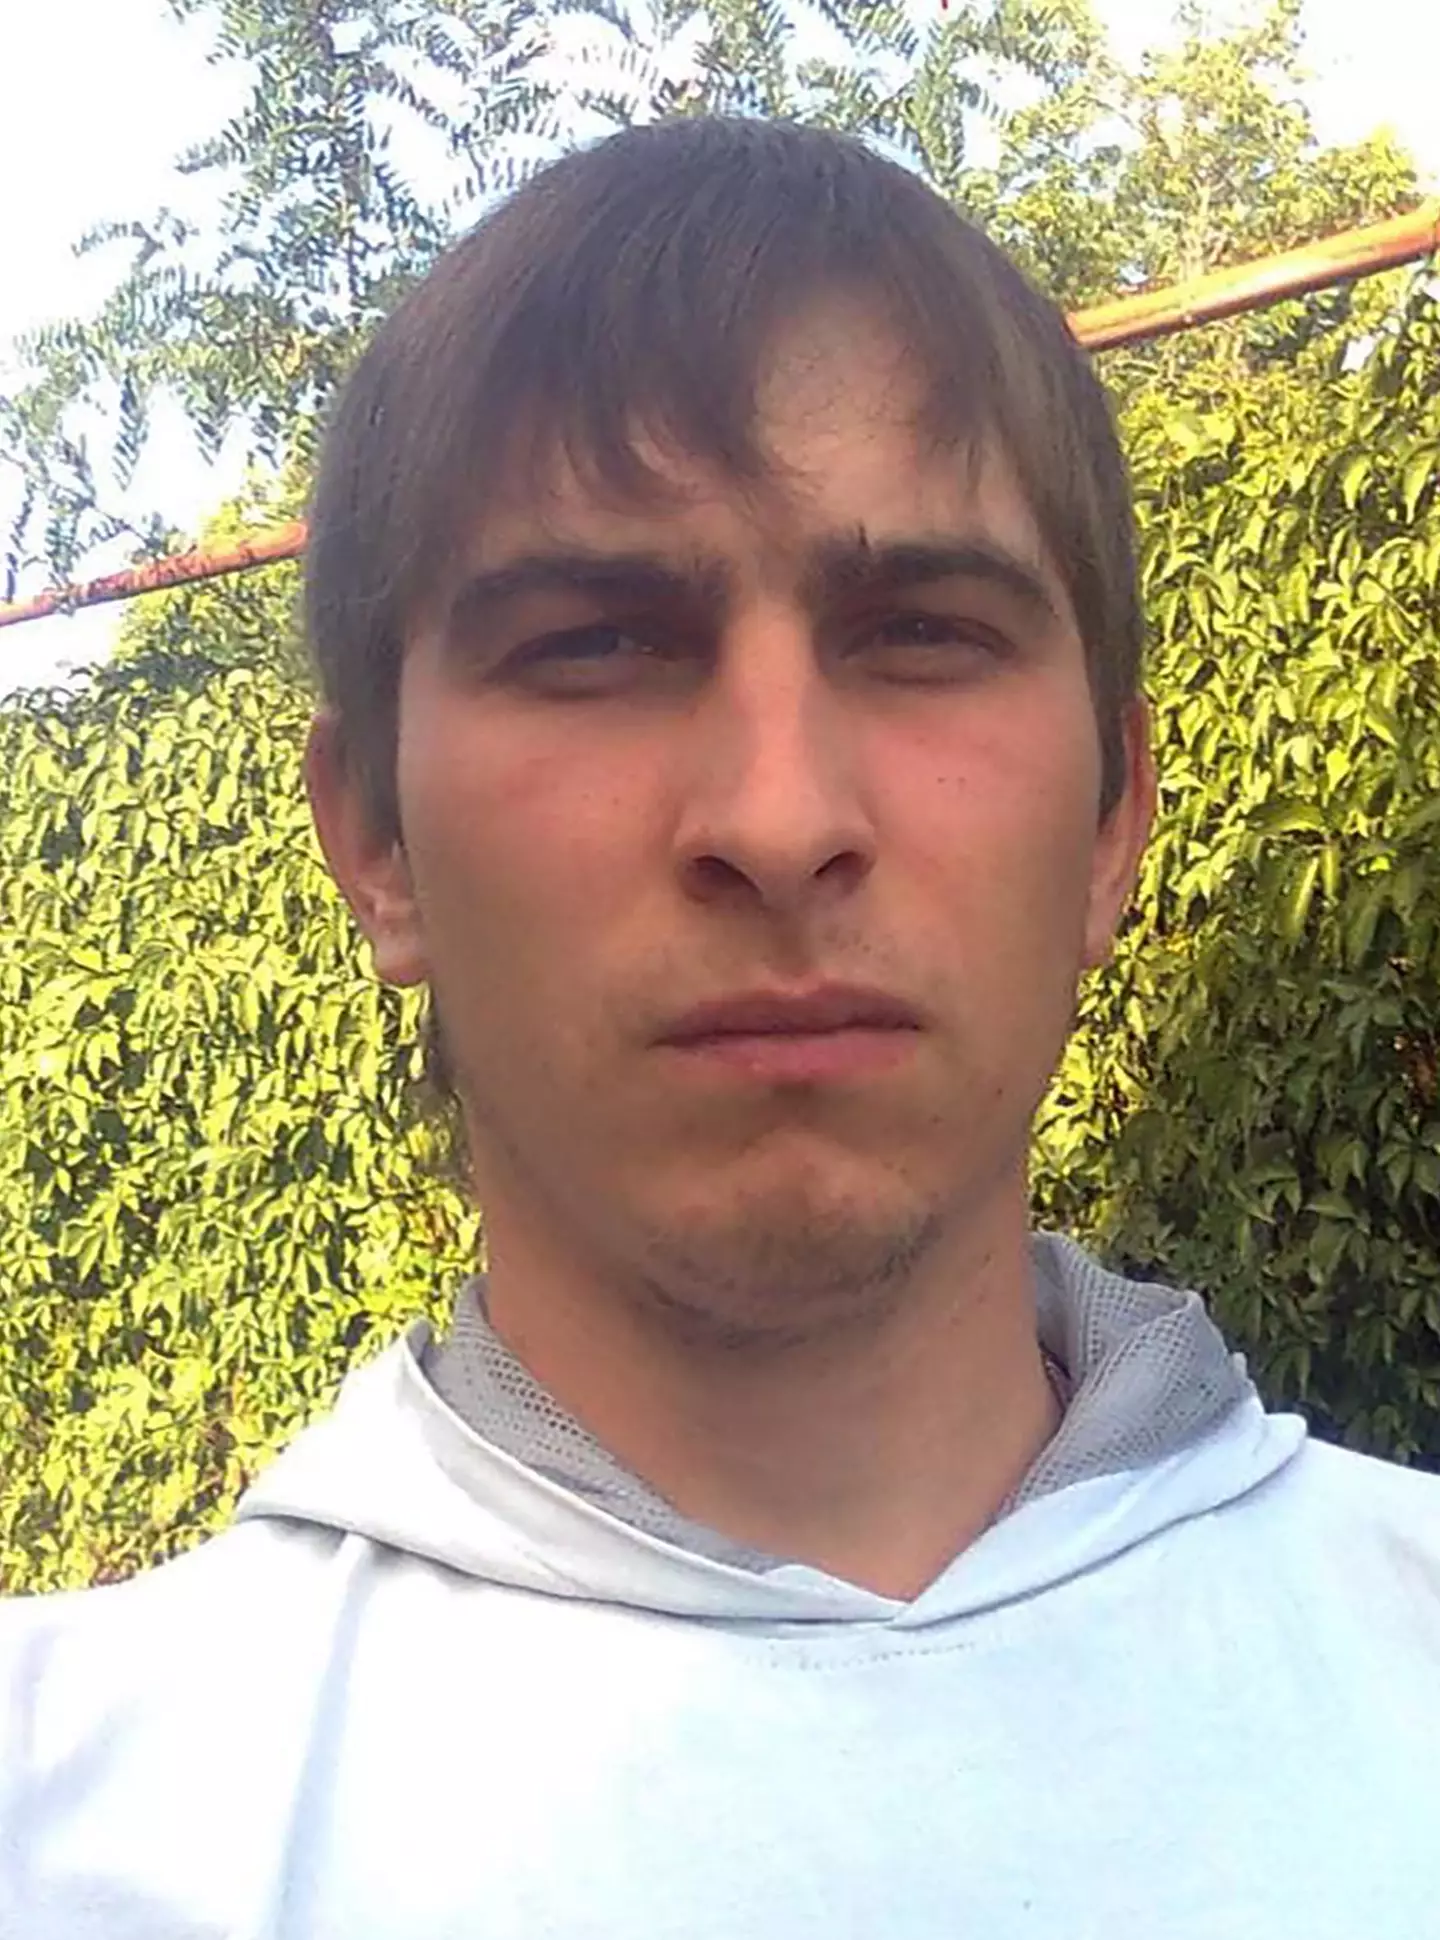 Andrey Tolstopyatov, who was shot dead by Redkin in mysterious circumstances.